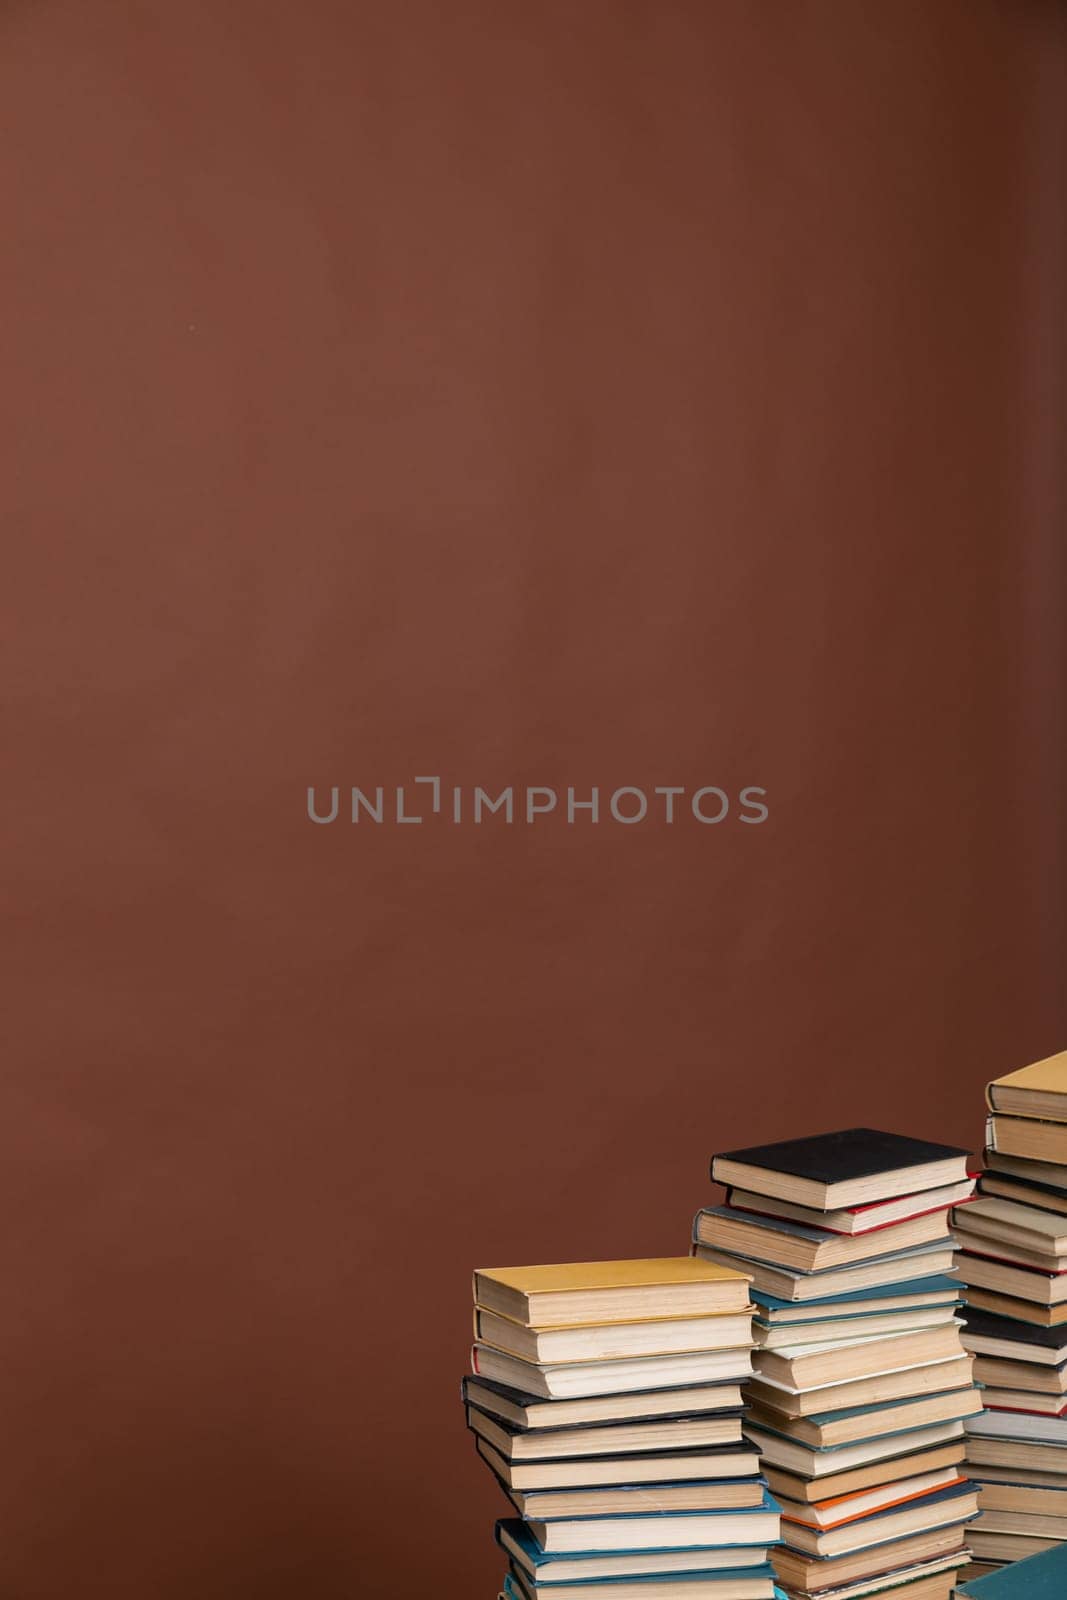 learning literacy science education stack of books on a brown background by Simakov